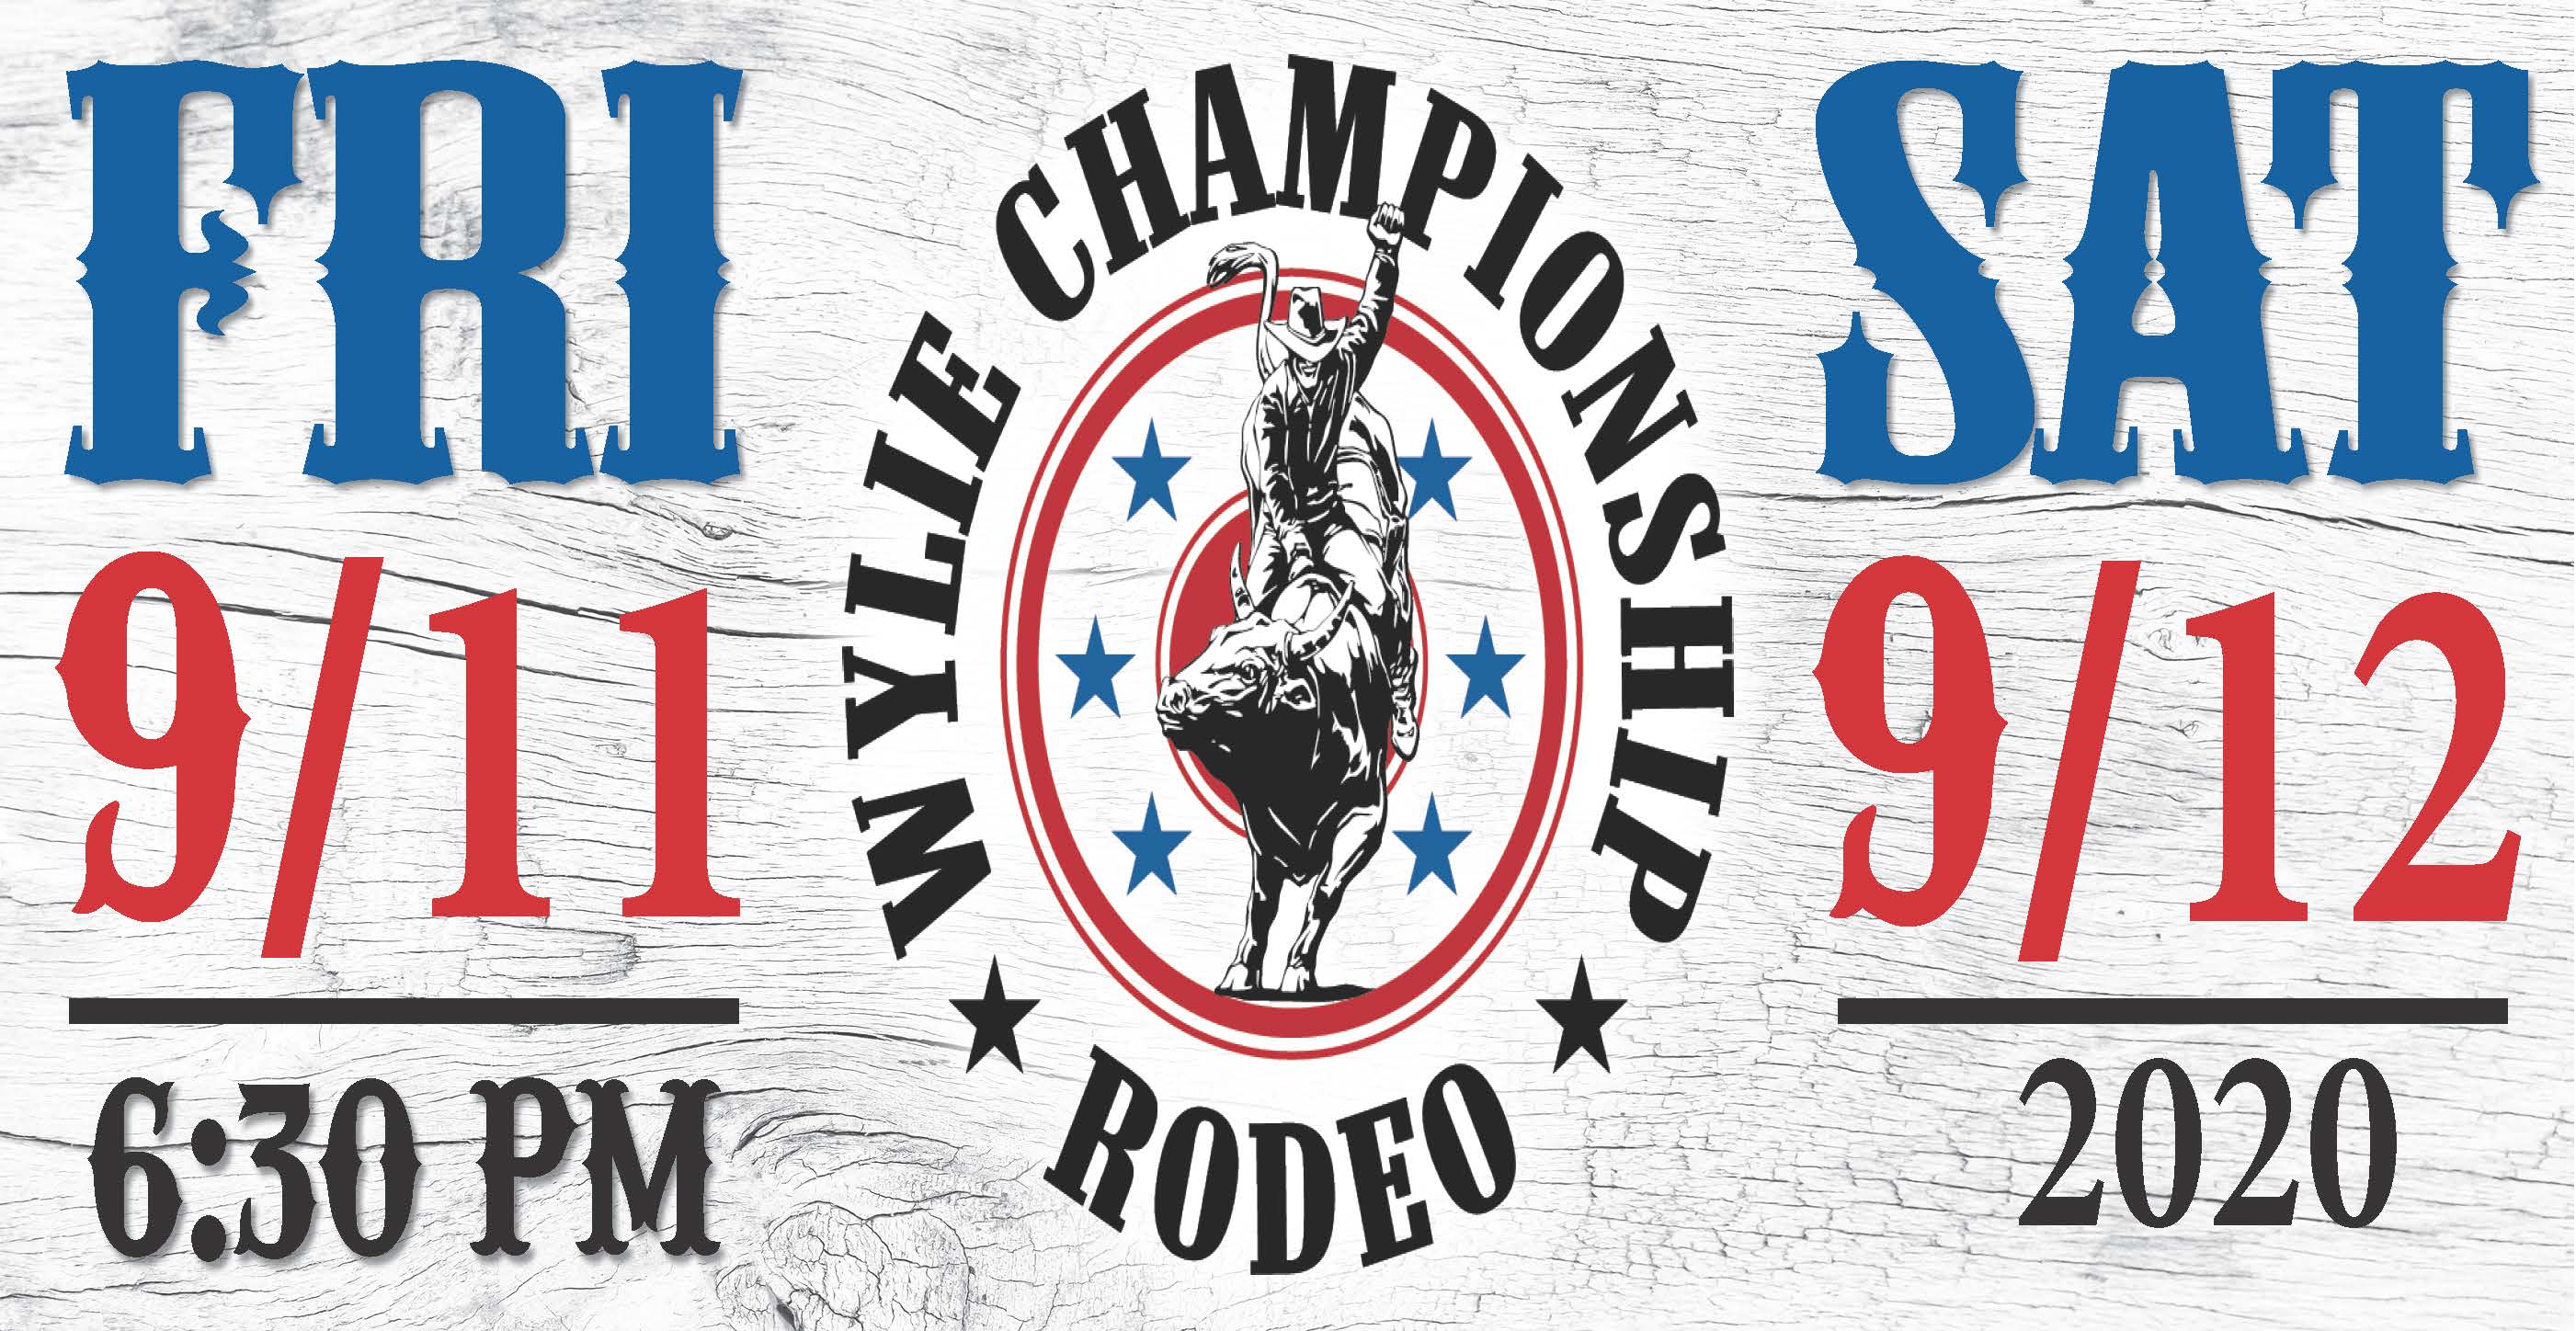 Wylie Rodeo Wylie Chamber of Commerce